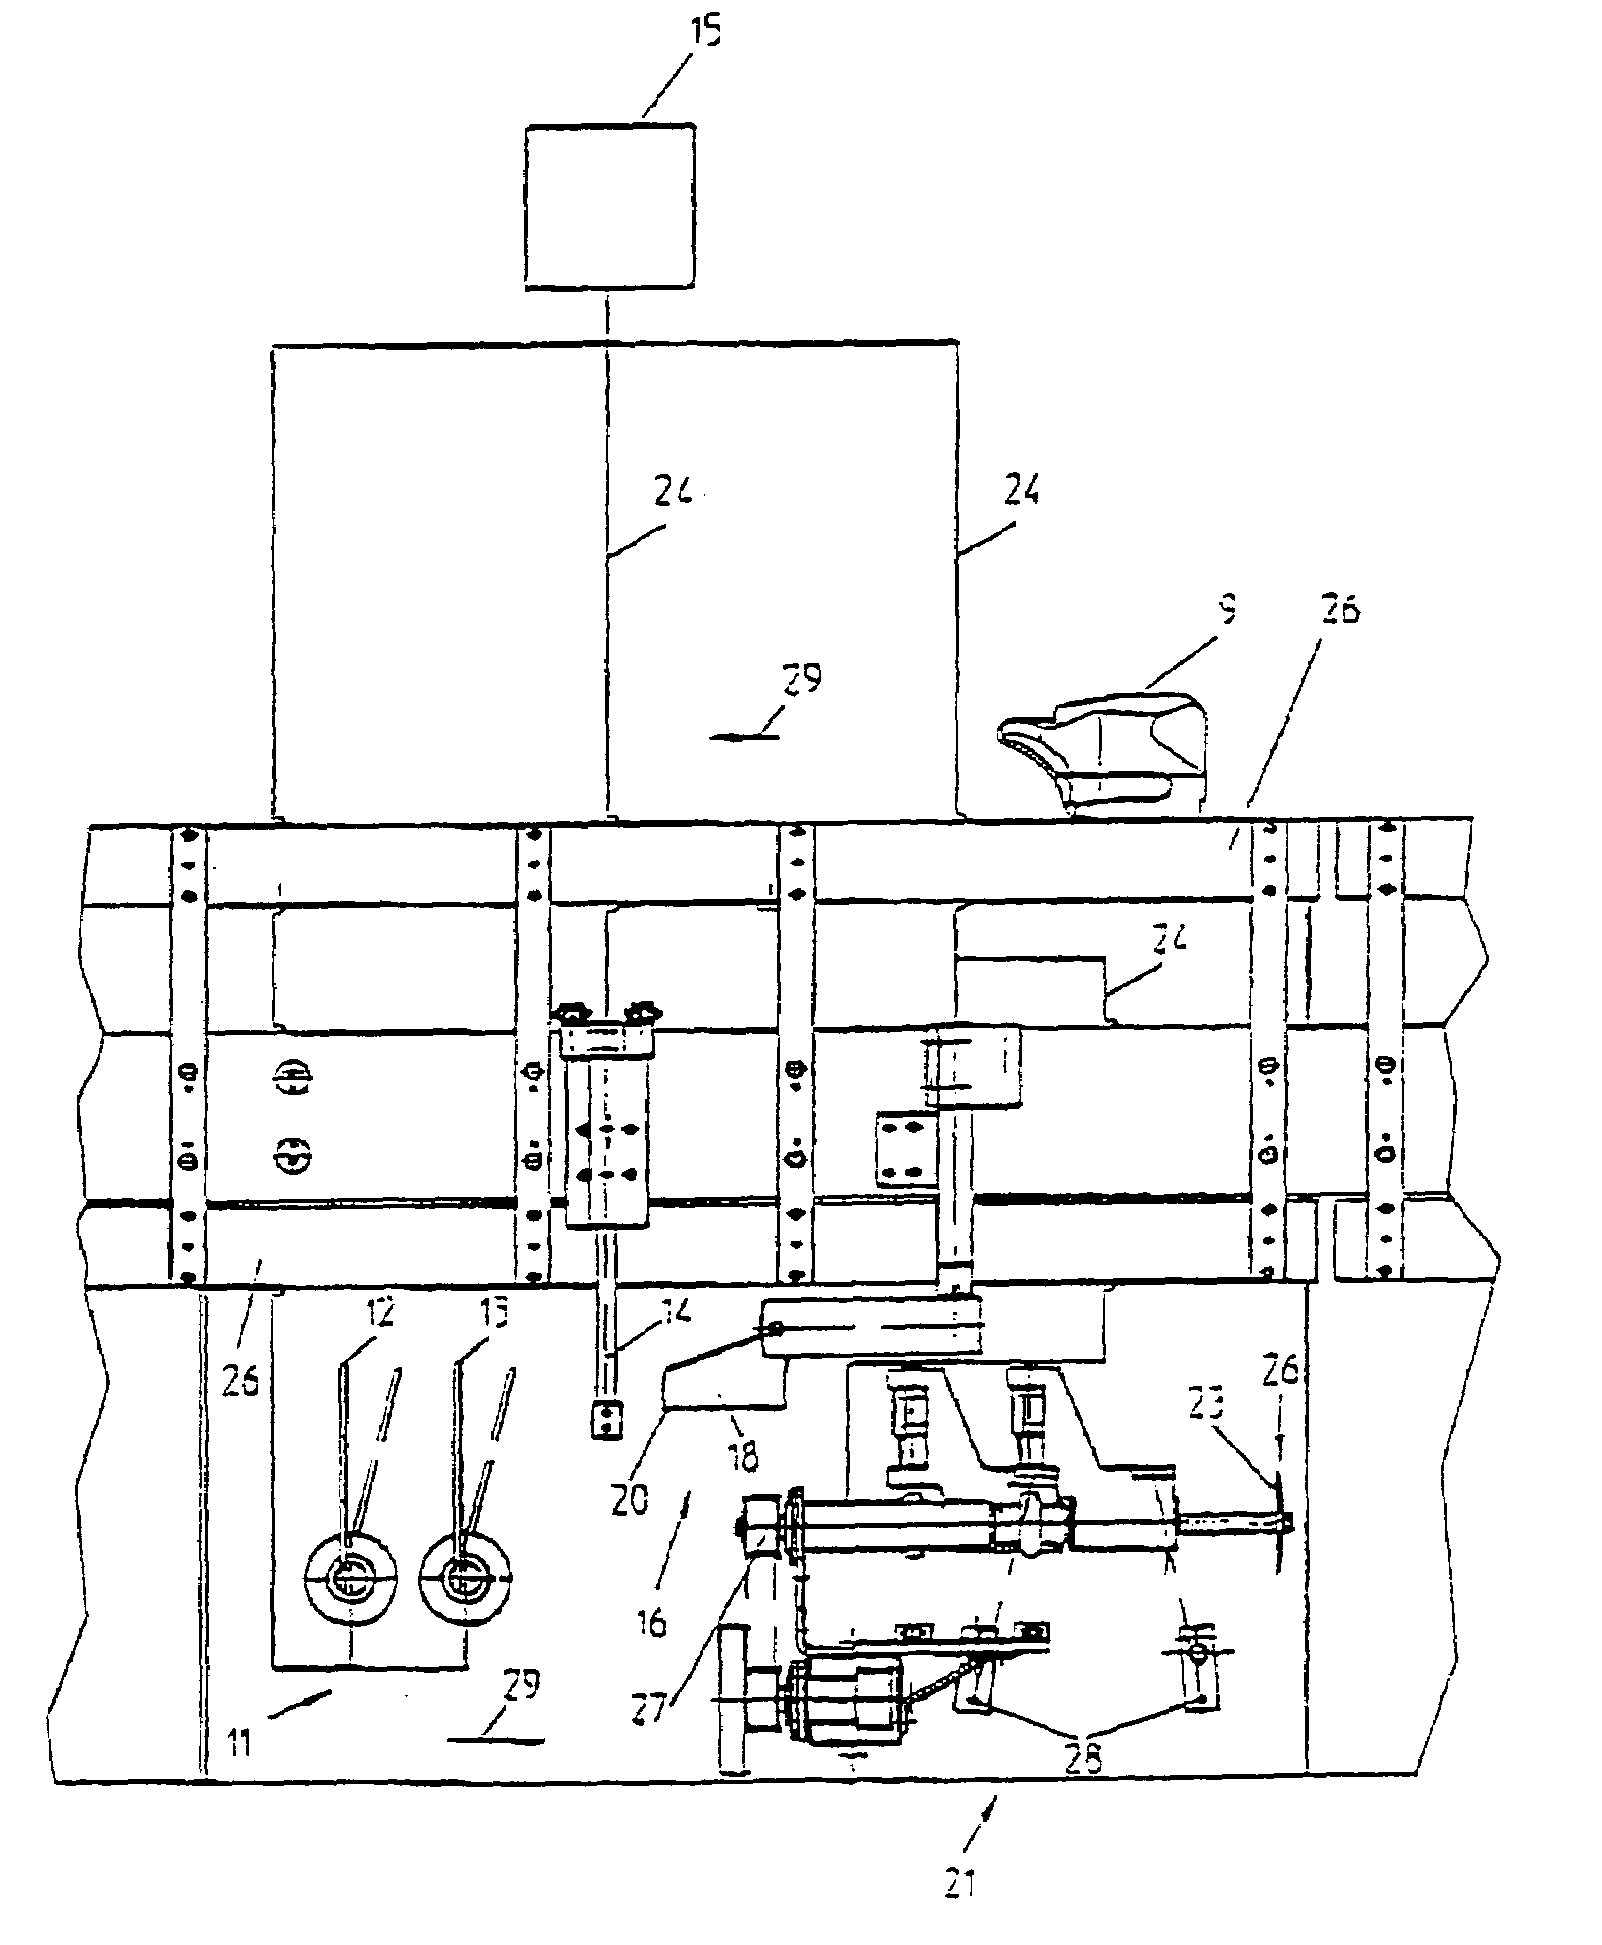 Filleting device